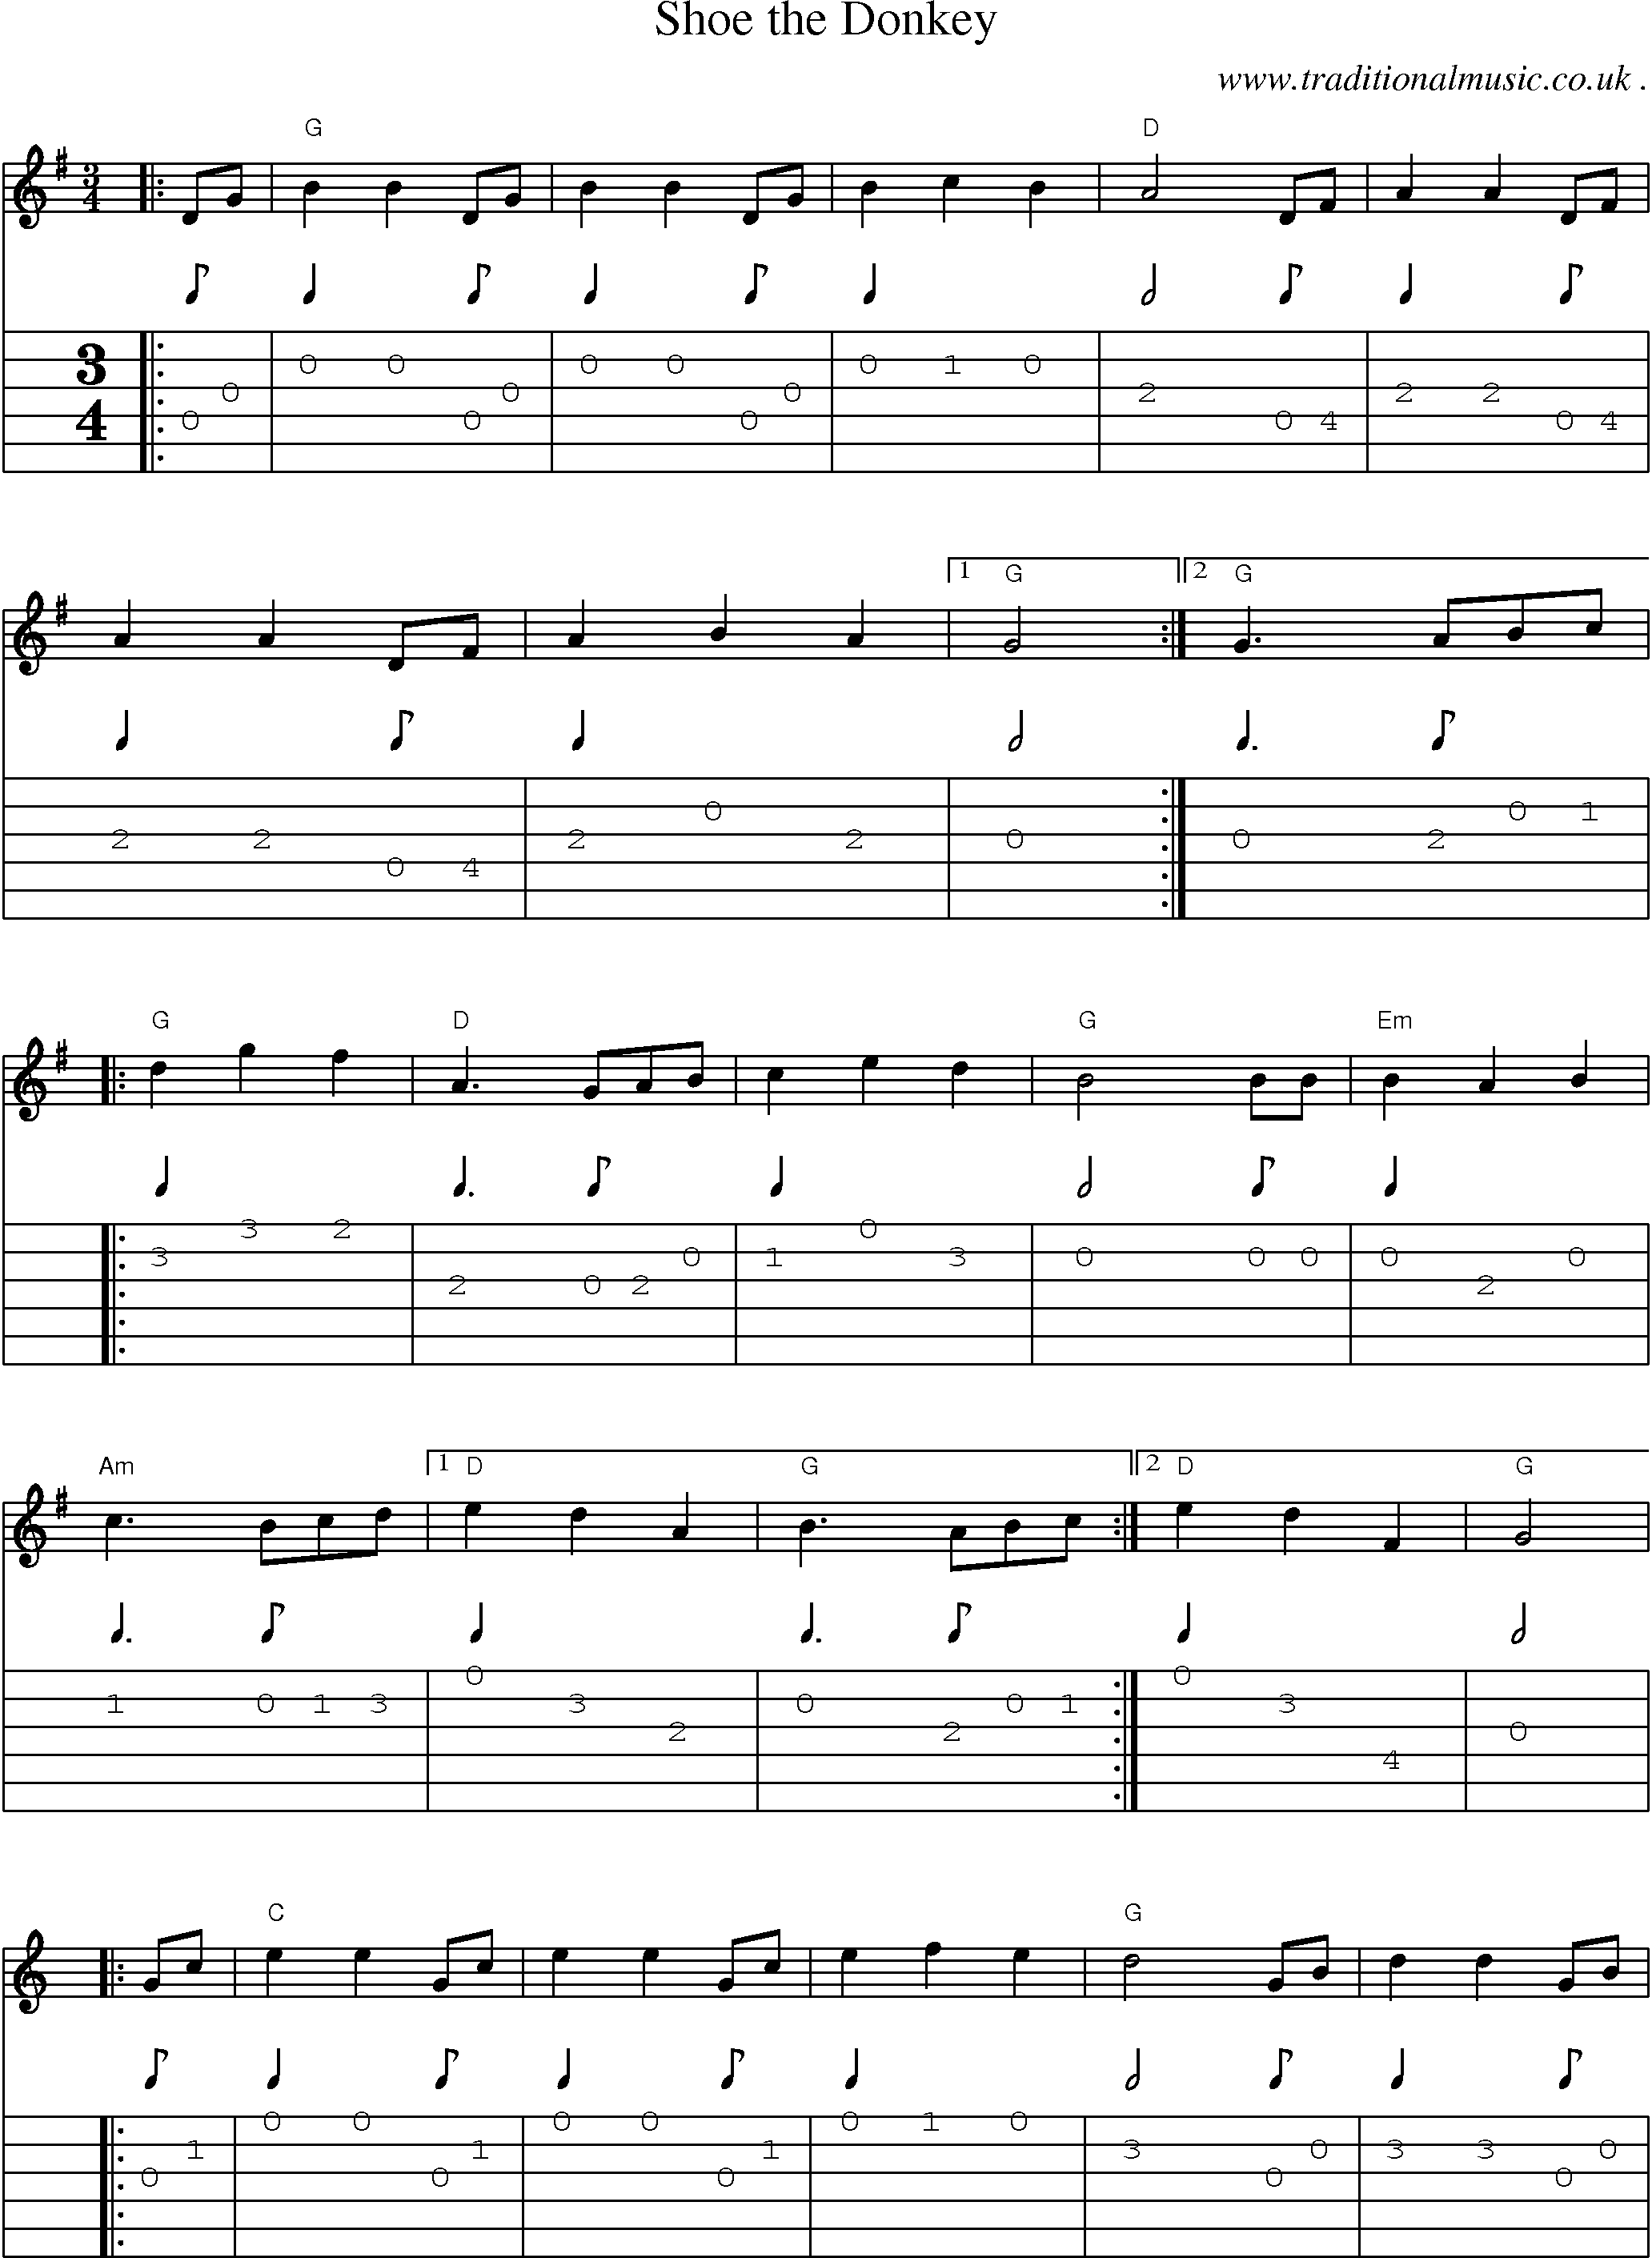 Music Score and Guitar Tabs for Shoe The Donkey